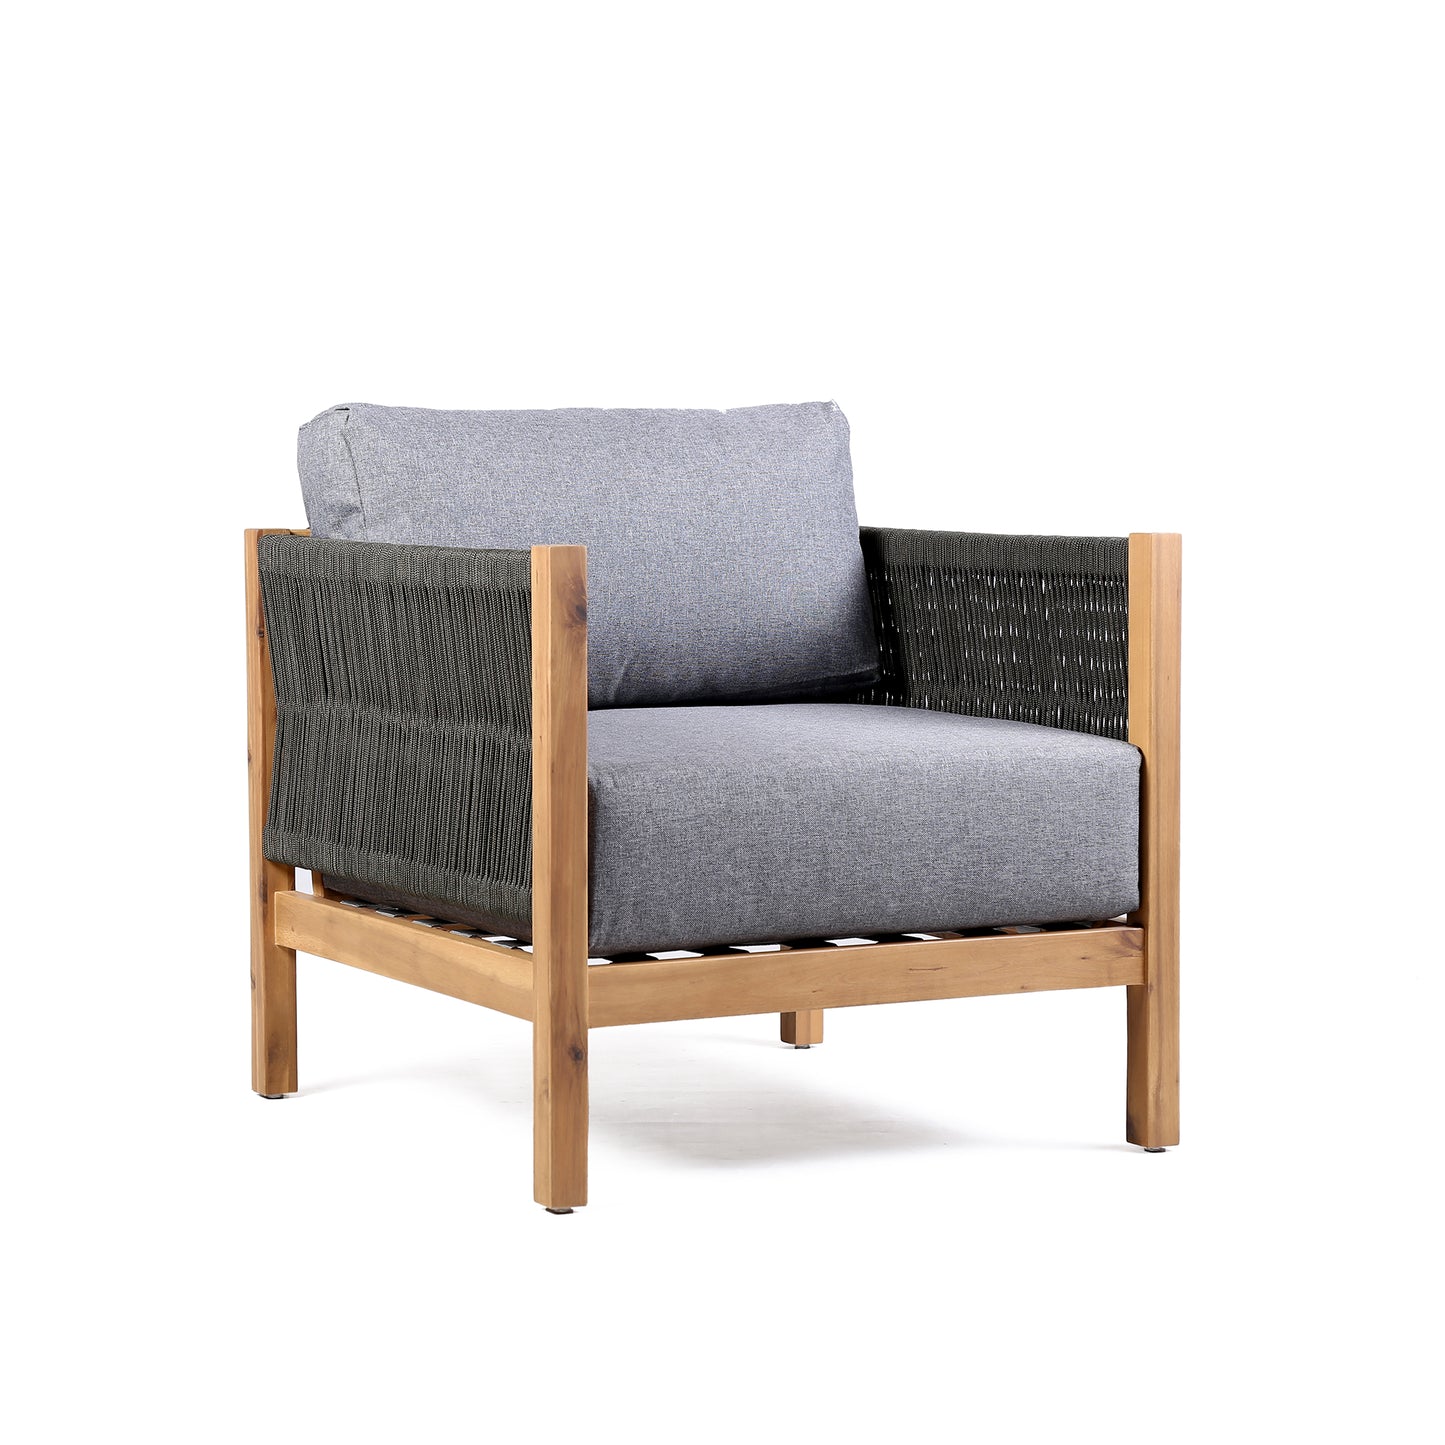 Sienna 4 Piece Eucalyptus Wood Outdoor Sofa Seating Set with Teak Finish and Gray Cushions